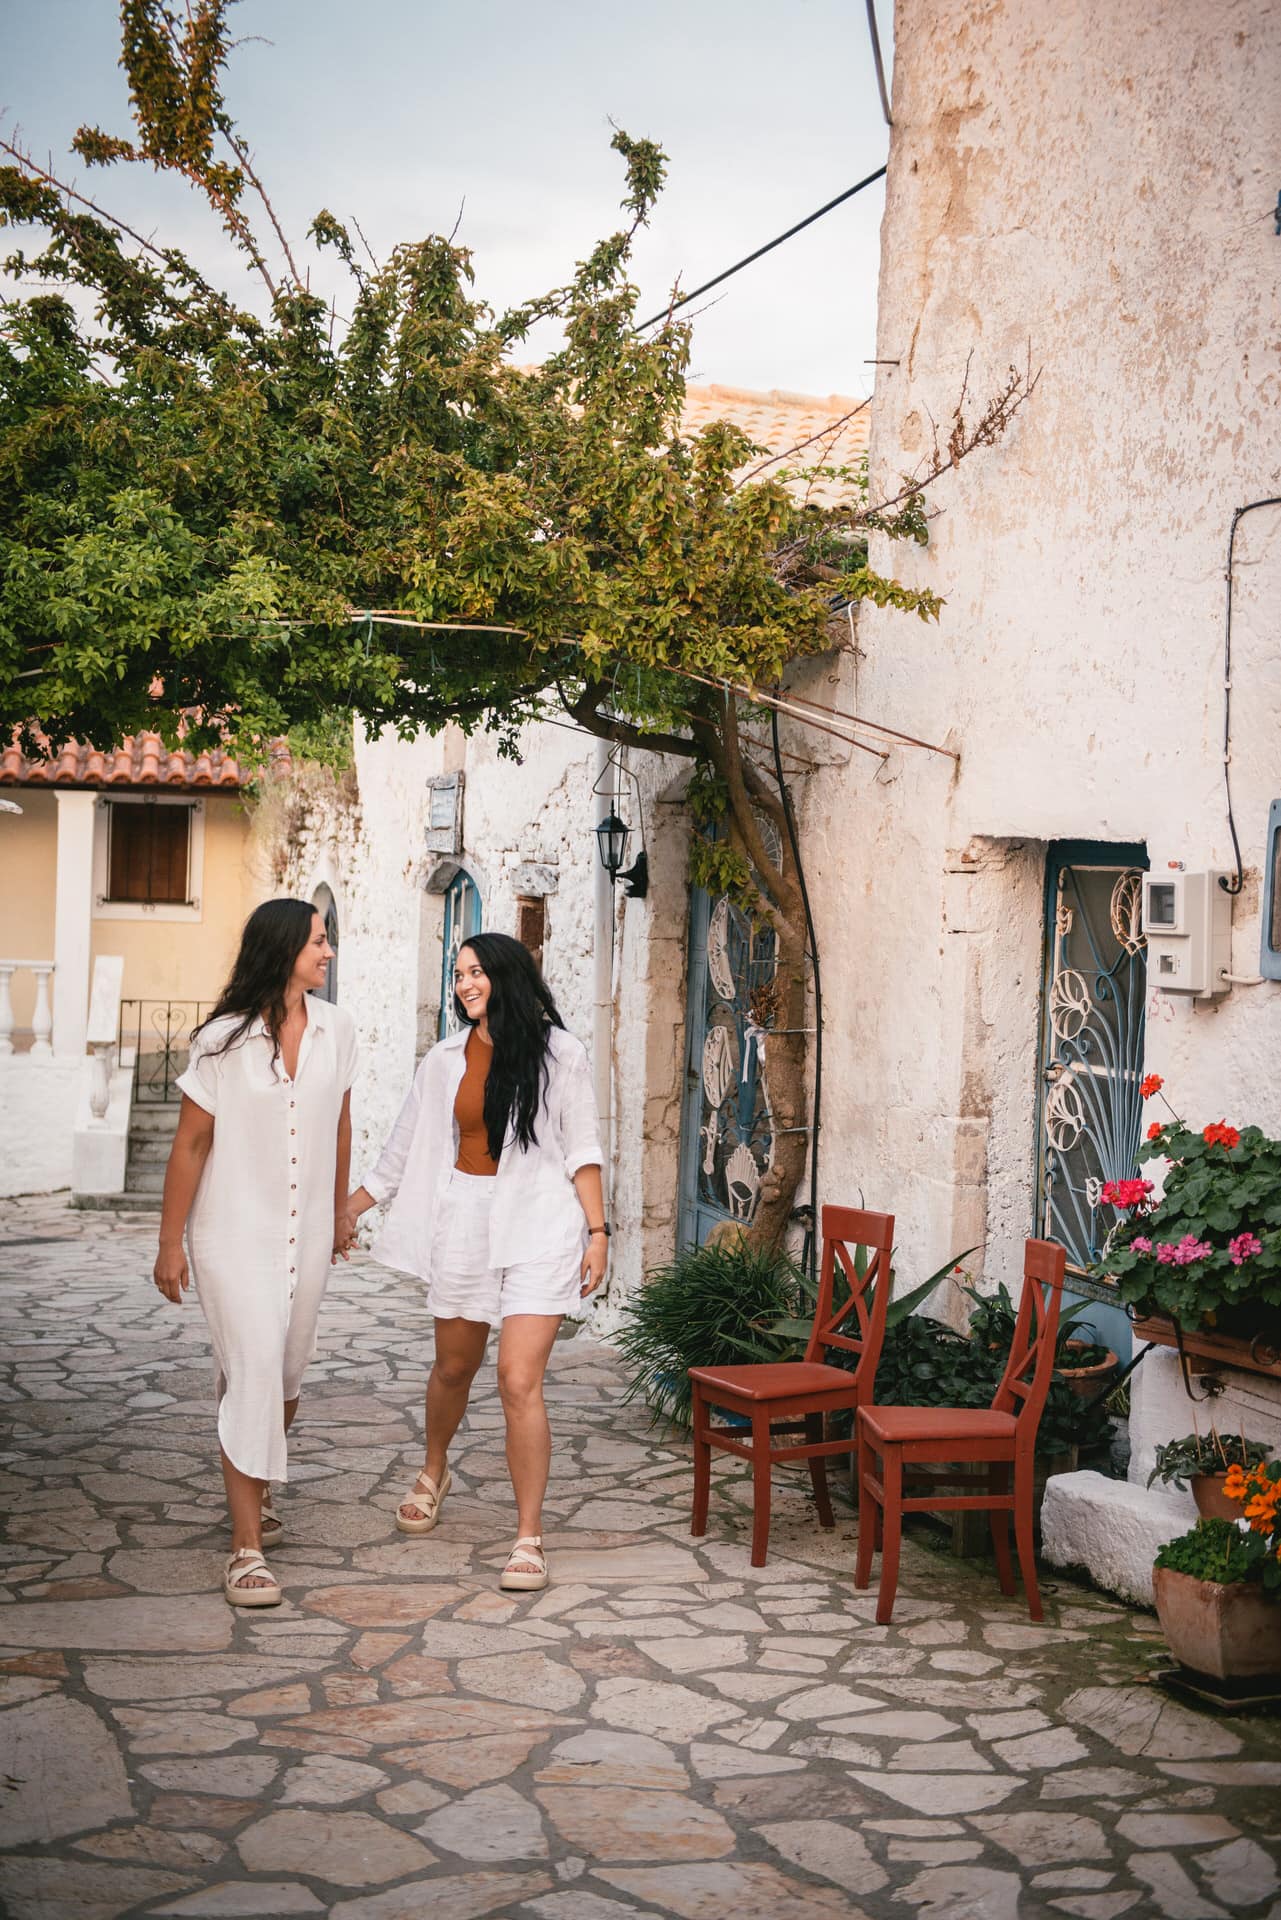 Brides holding hands while strolling through the picturesque streets, cherishing their Corfu elopement.